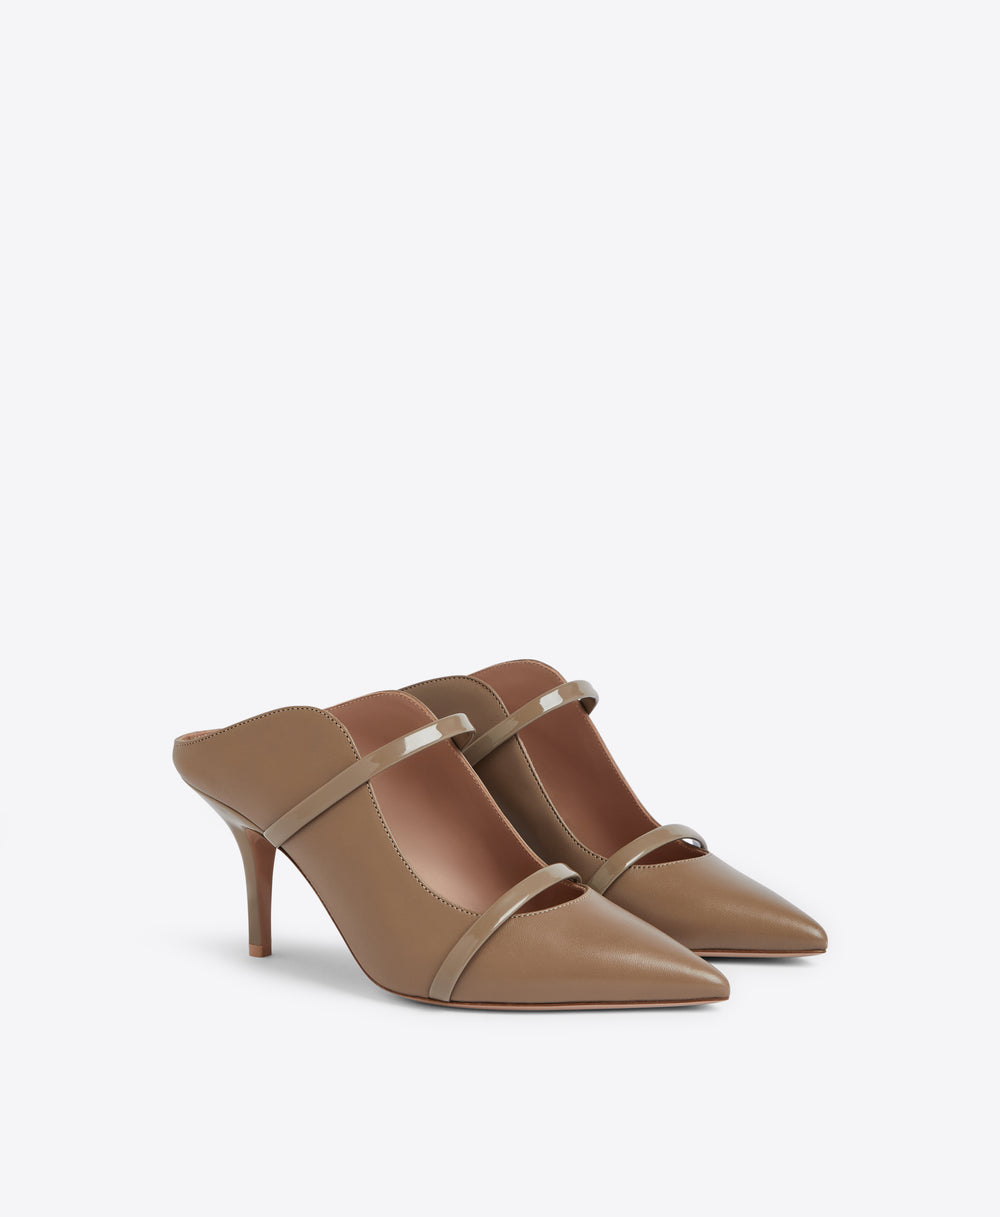 Malone Souliers Maureen 70 Taupe Leather Heeled Mules 